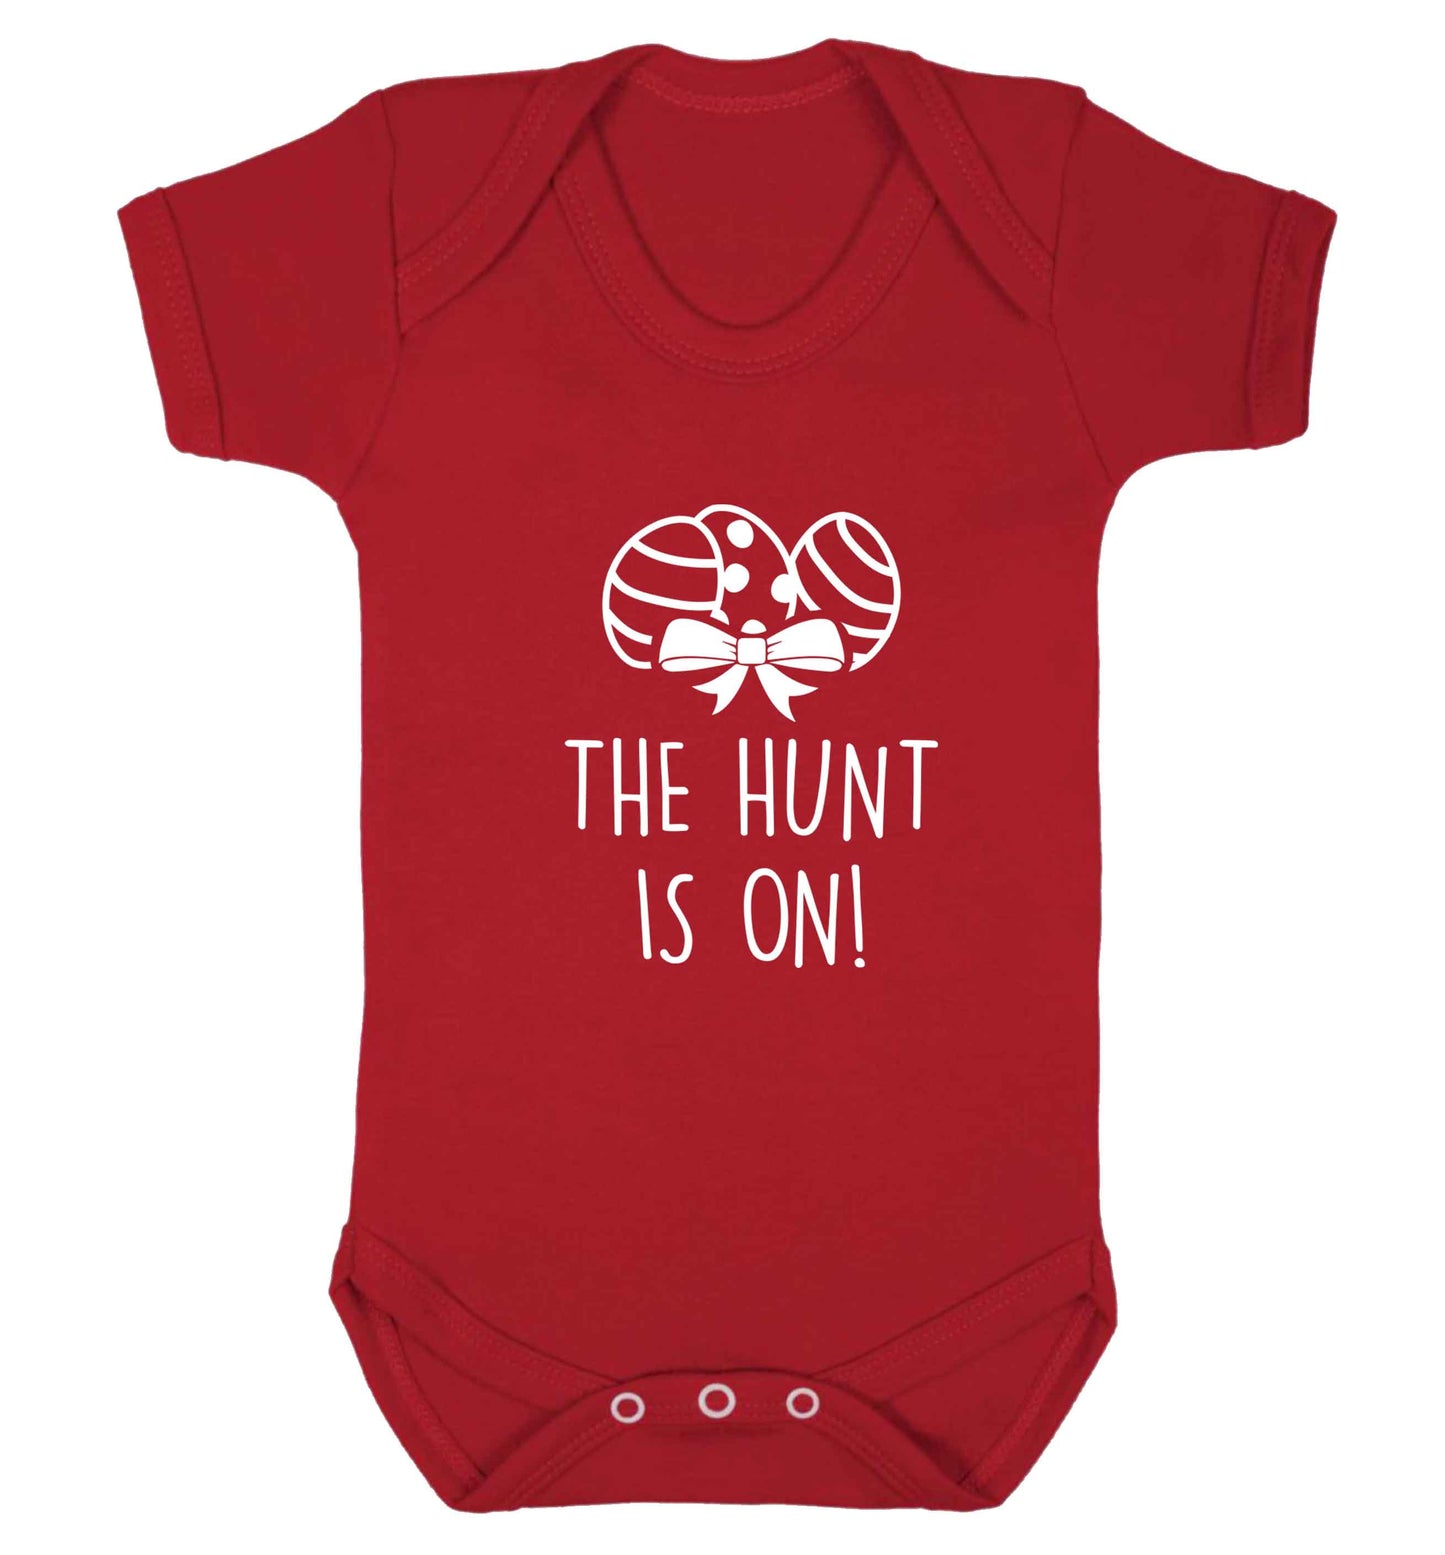 The hunt is on baby vest red 18-24 months